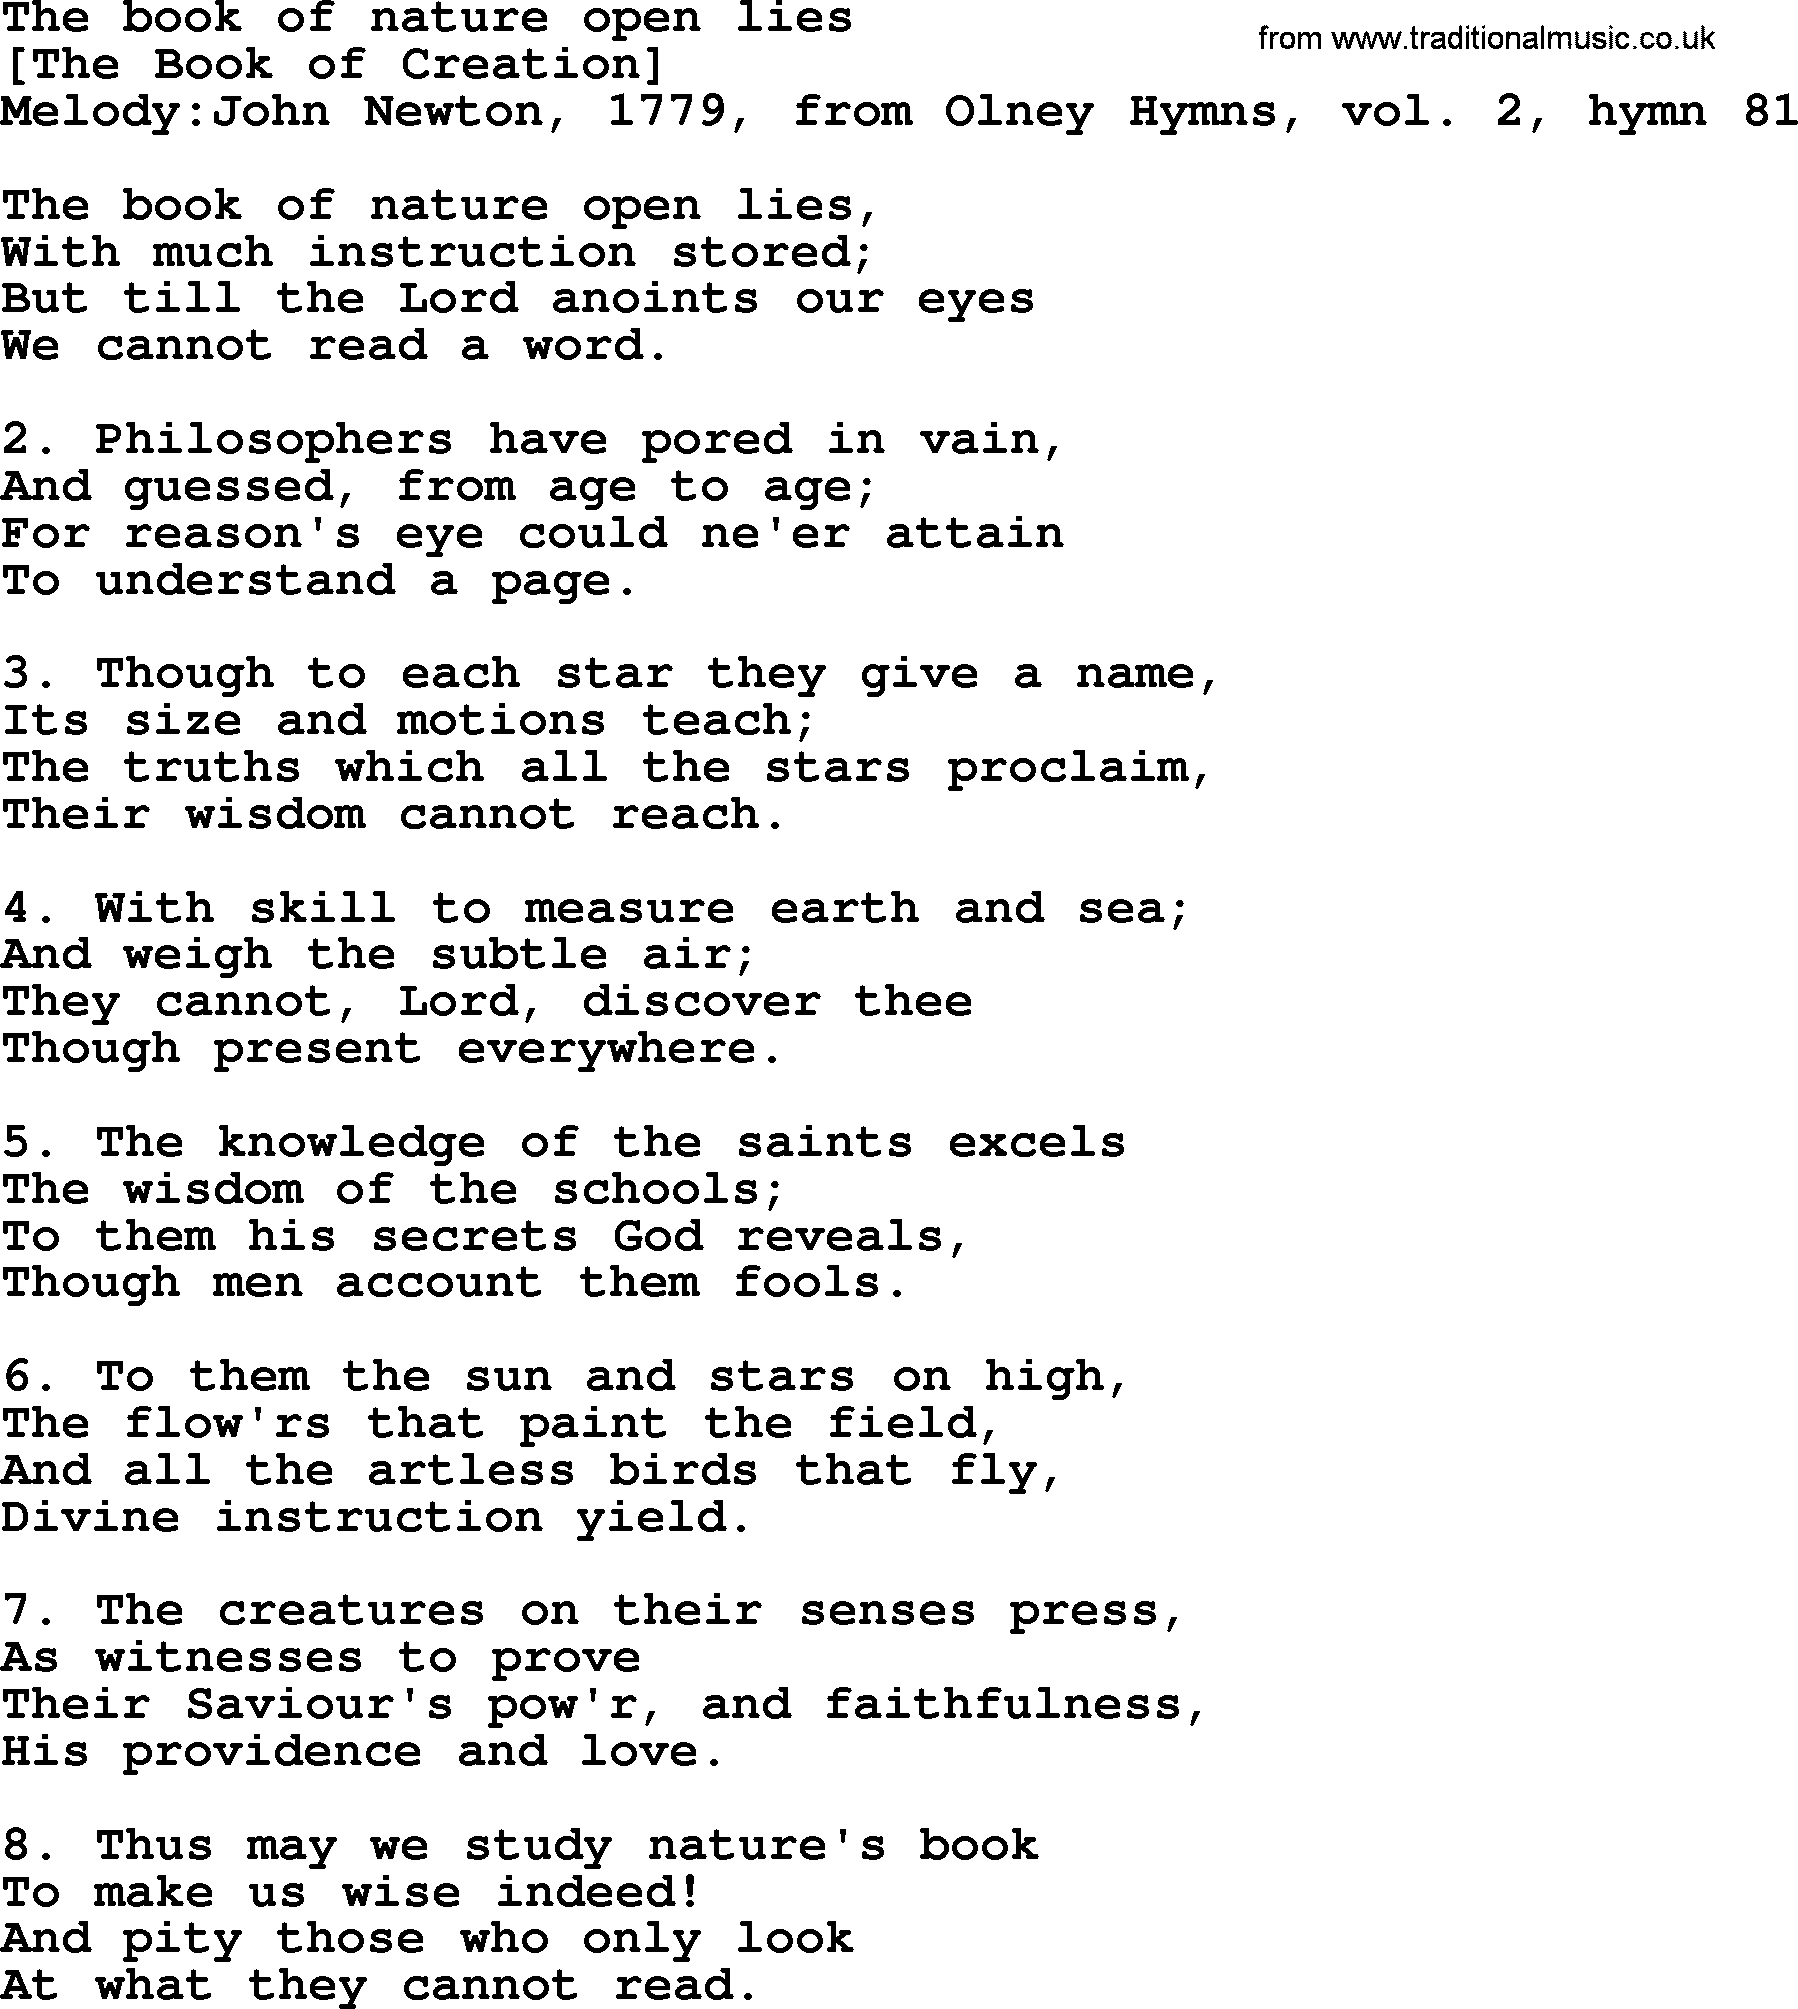 Old English Song: The Book Of Nature Open Lies lyrics